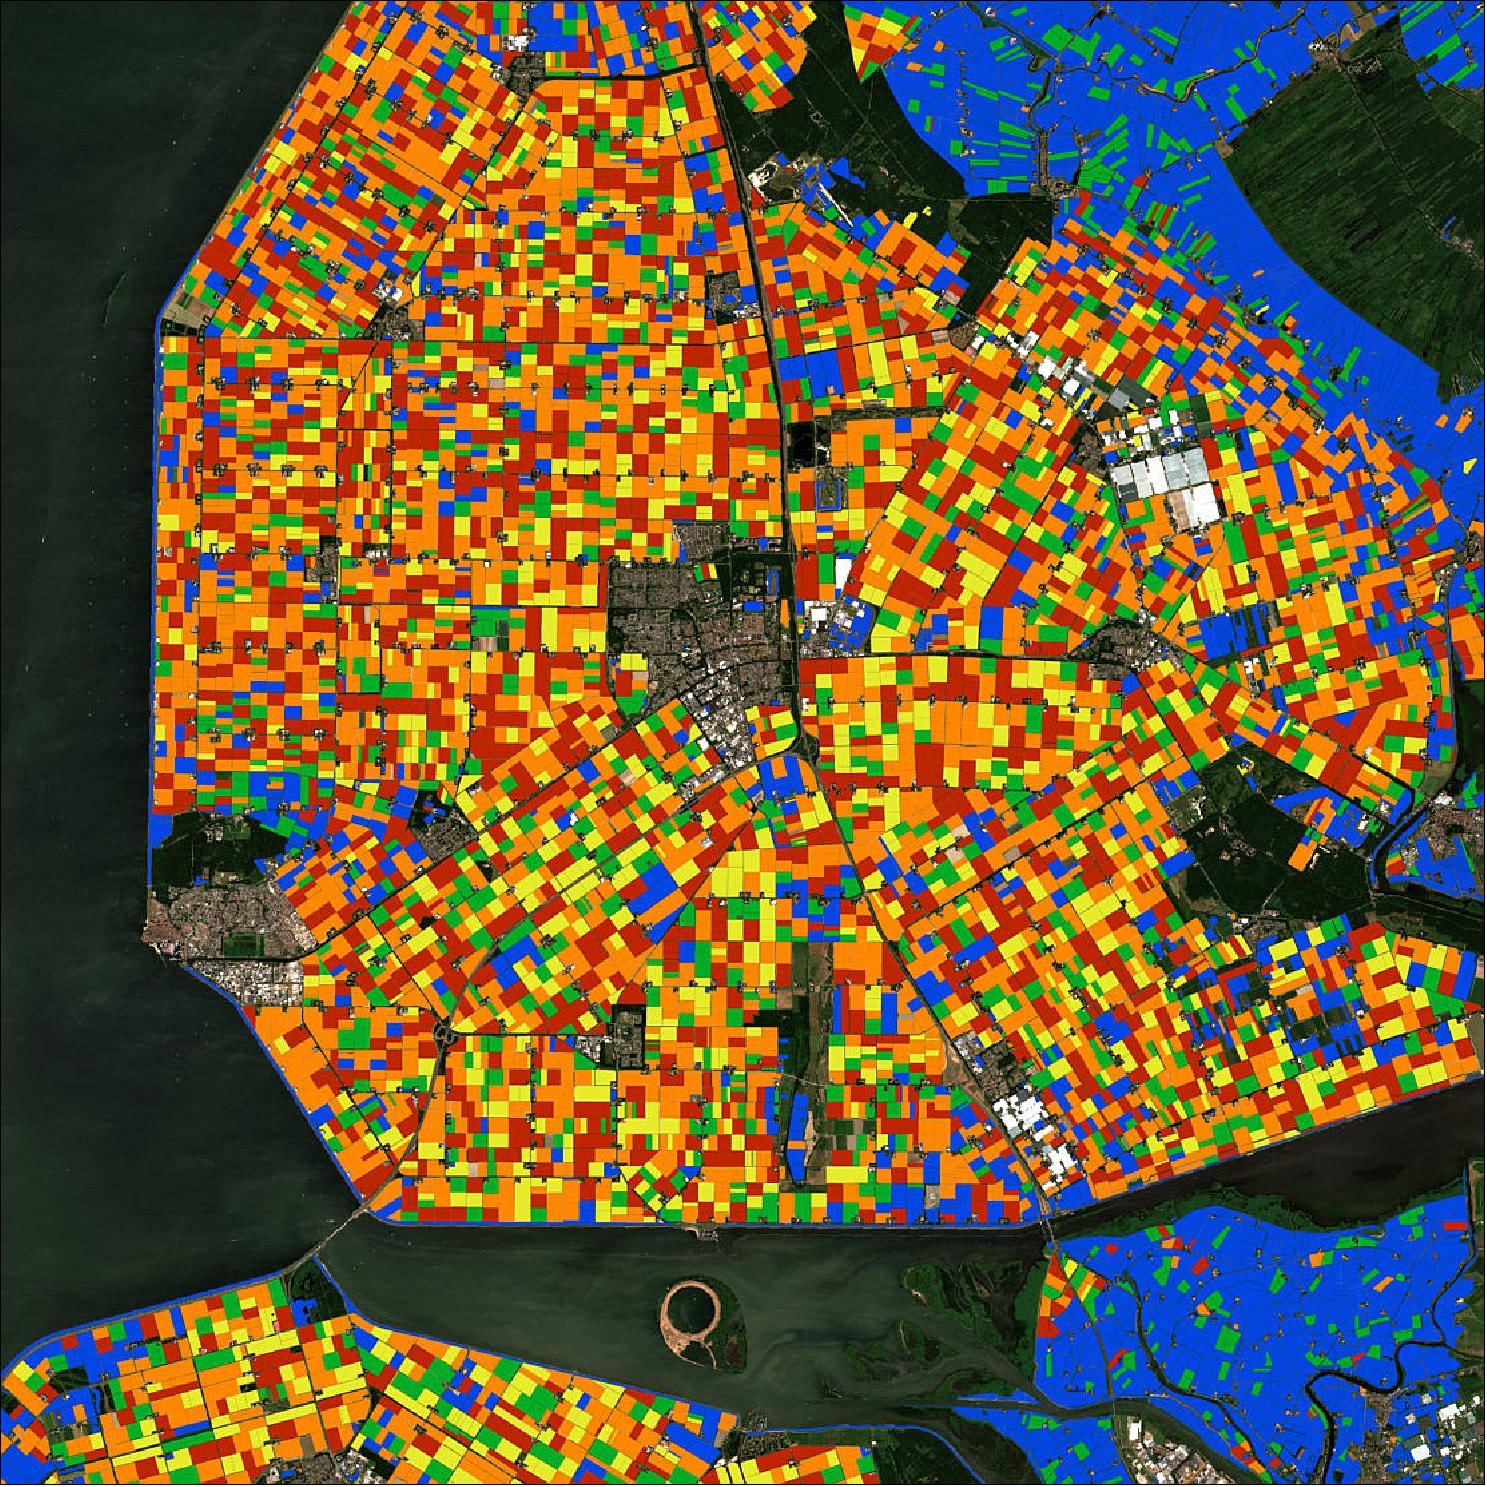 Figure 46: The image shows different crop types around Emmelrod in the Netherlands. Here, green shows summer crops, red is potatoes, orange is market crops, yellow is cereals and blue depicts grassland. The area is important for the agrofood sector and, in particular, has strong ties to the international potato industry. By integrating Copernicus Sentinel-2 based crop-type monitoring directly into existing industry workflows, the agrofood industry can gain information about the growth and potential yield of crops, potatoes in particular, including the impact of ongoing droughts (image credit: ESA, the image contains modified Copernicus Sentinel data (2018), processed by GeoVille)